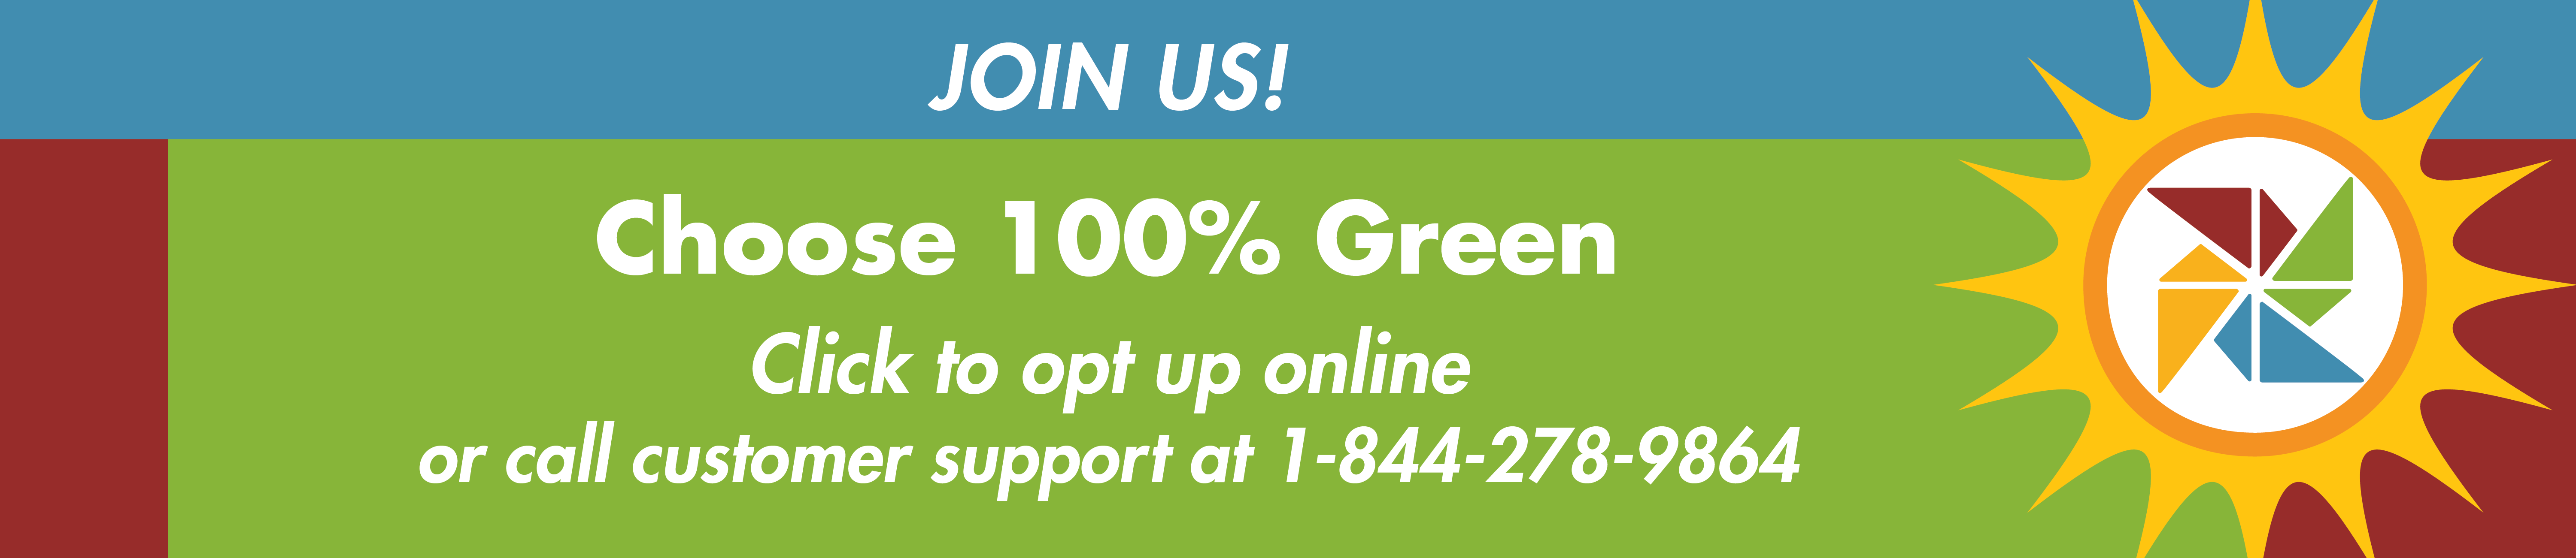 Join us! Choose 100% Green. Click to opt up online or call customer support at 1-844-278-9864.